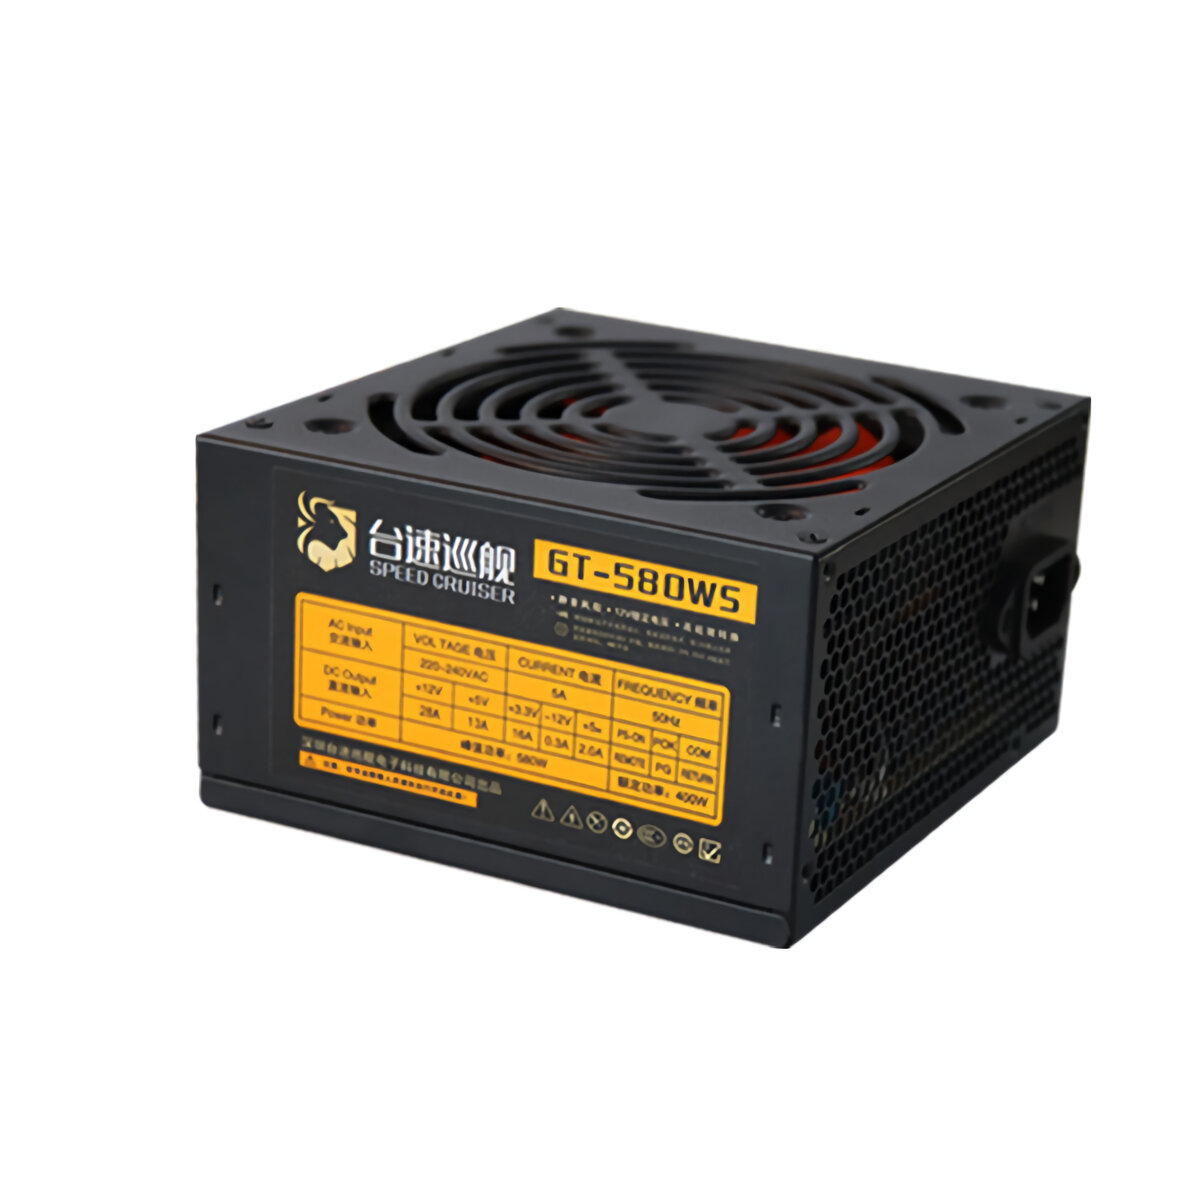 

SpeedCruiser 400W PC Power Supply ATX Computer Case Chassis Power Supply for Intel AMD GT-580WS